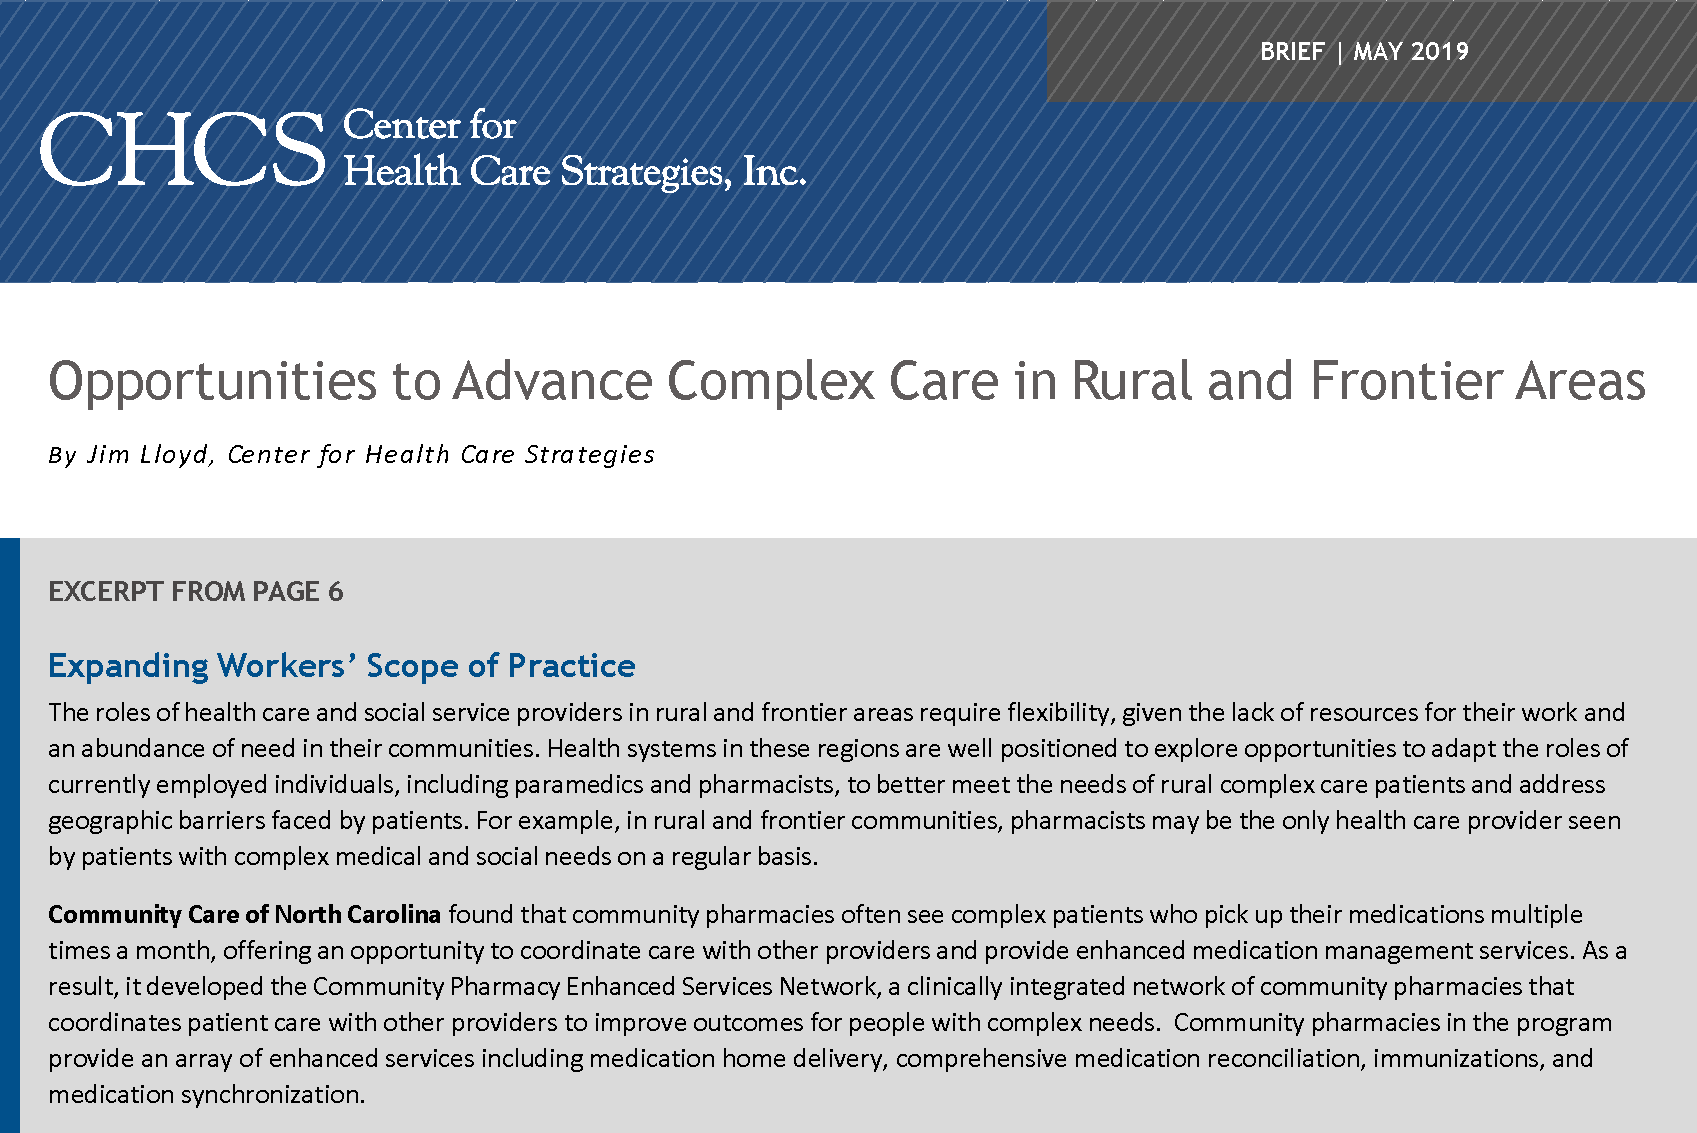 CCNC's model for community pharmacies featured in publication by Center for Health Care Strategies